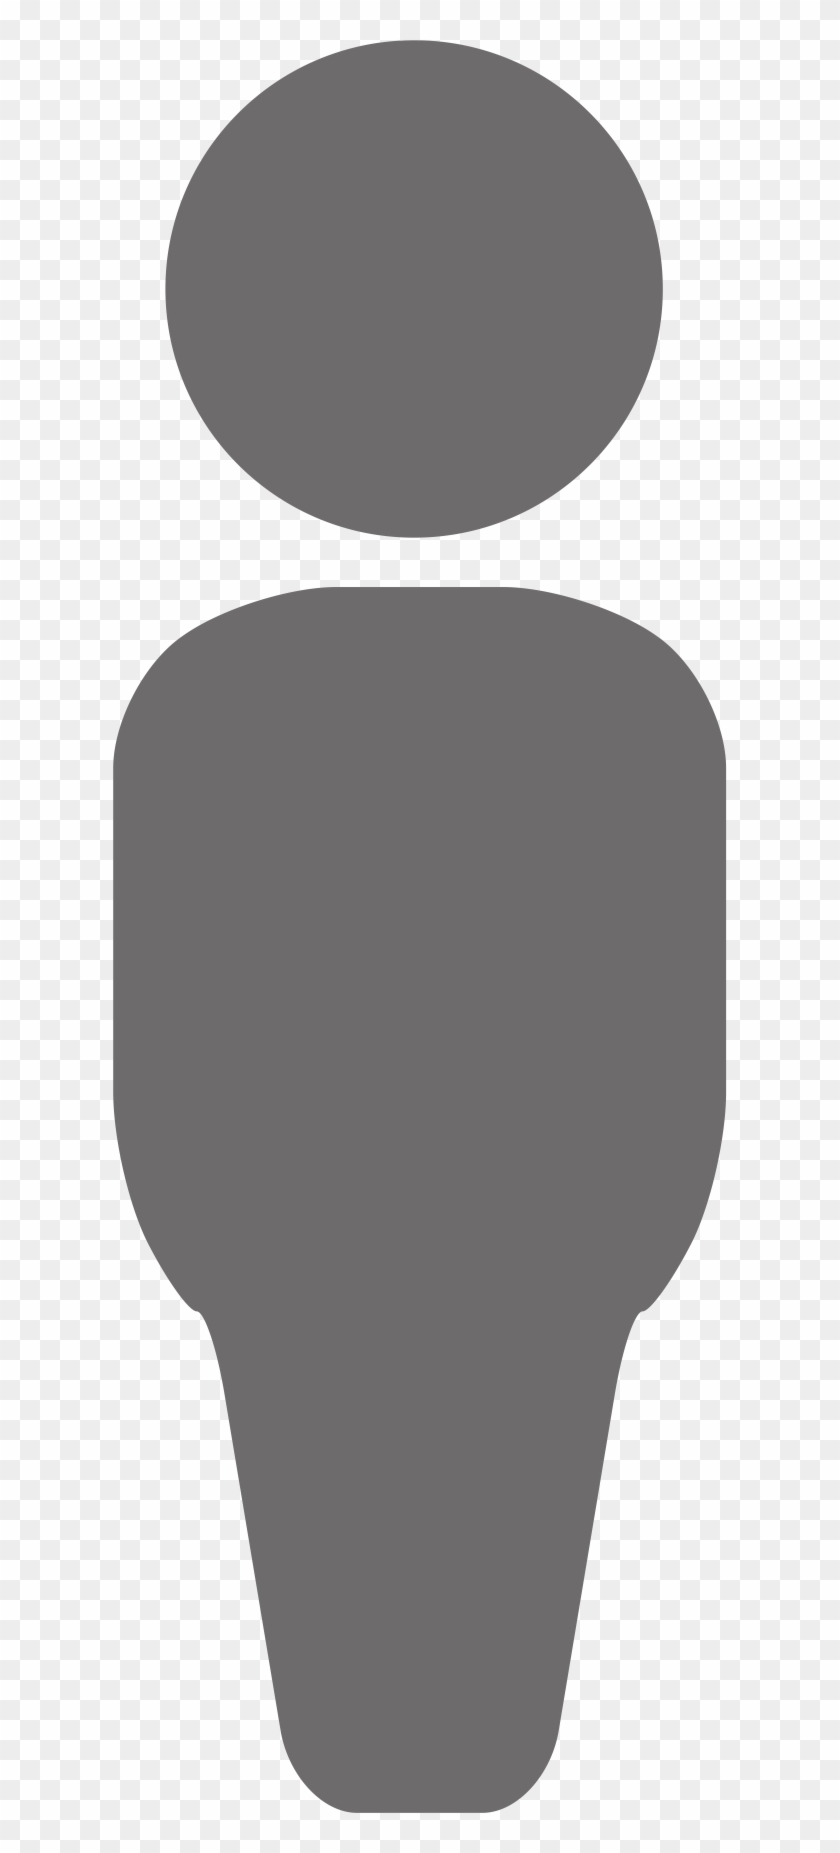 Person - Grey Person Icon Png Clipart